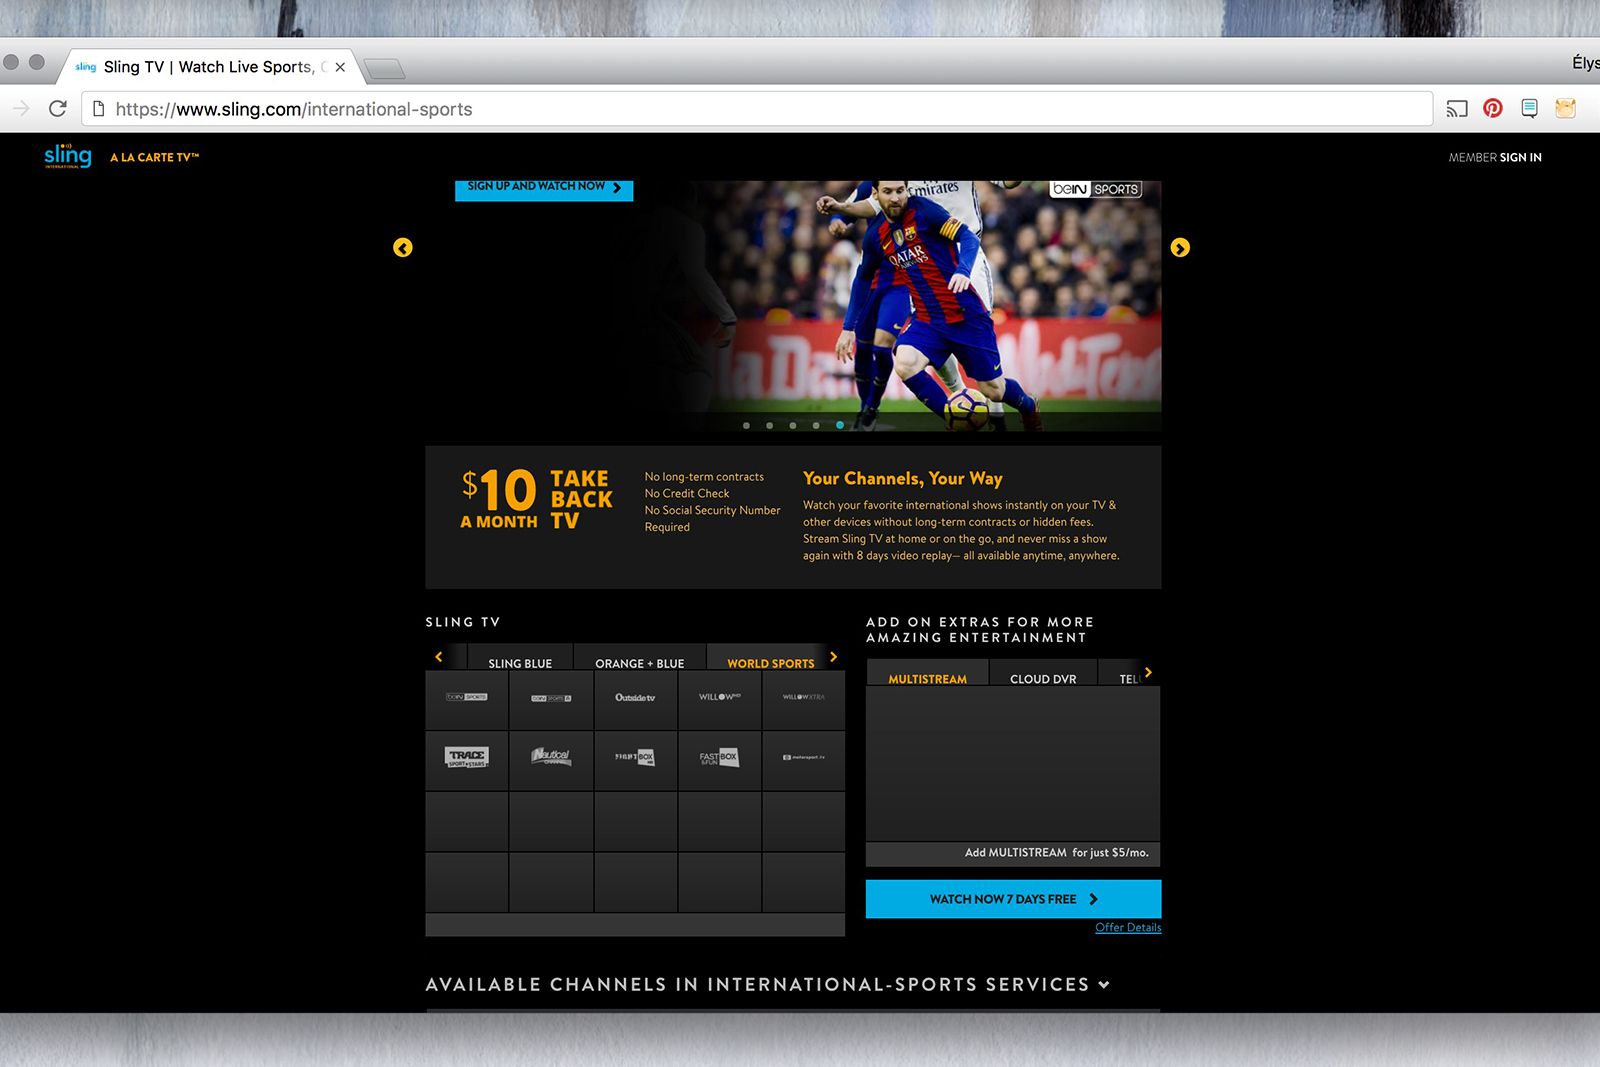 Yes you can use Sling TV to watch world sporting events - heres how image 1